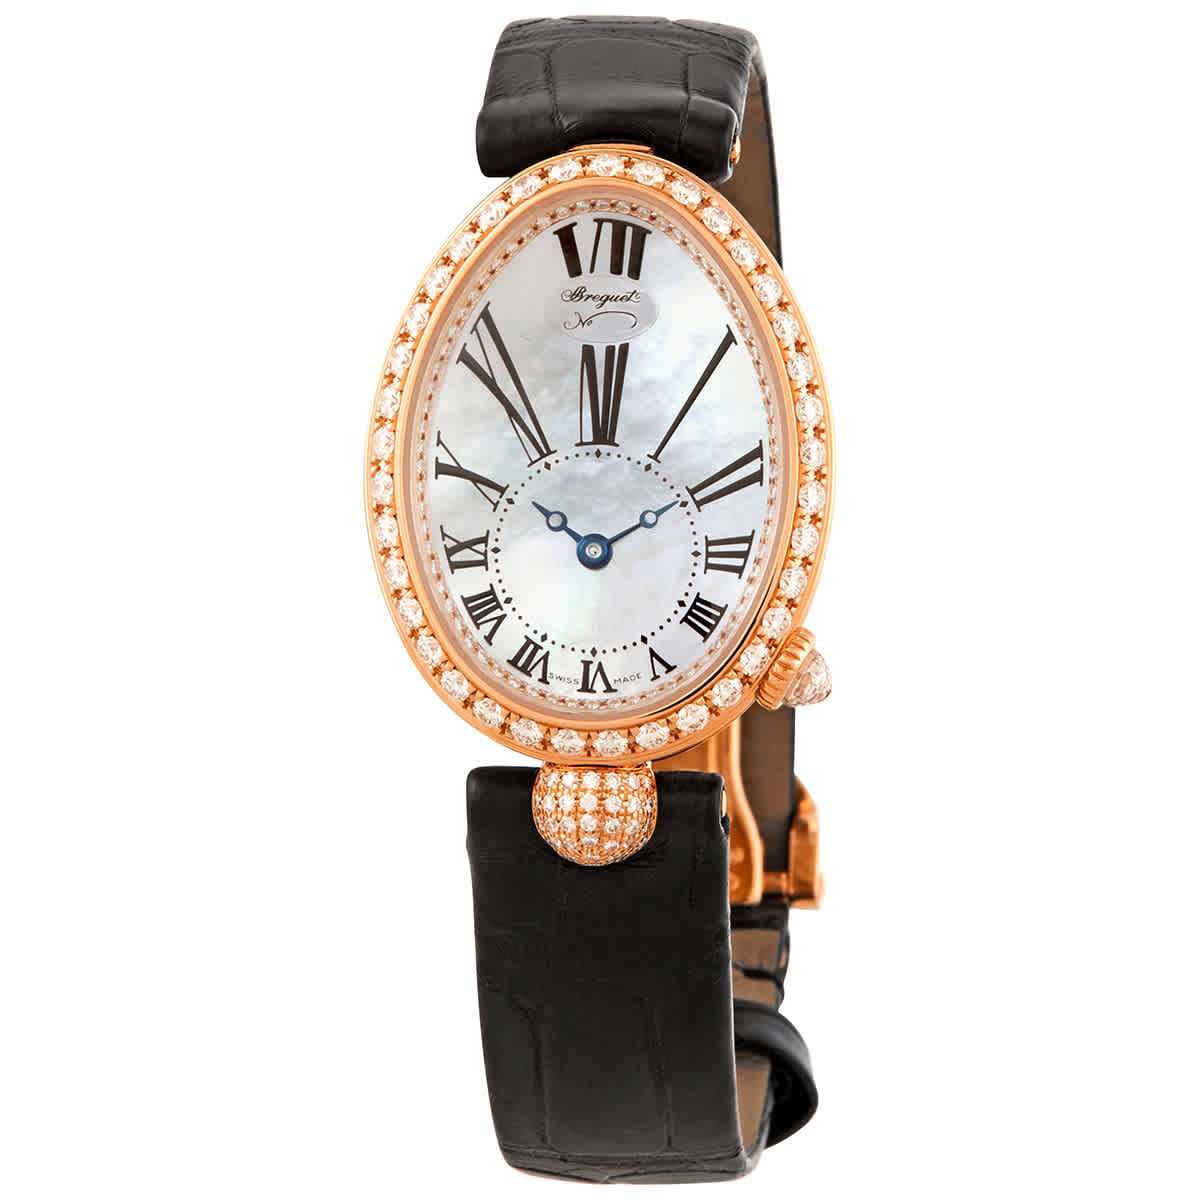 Breguet Reine De Naples Automatic Ladies Watch 8928br51944dd0d In Black / Blue / Gold / Mother Of Pearl / Rose / Rose Gold / White